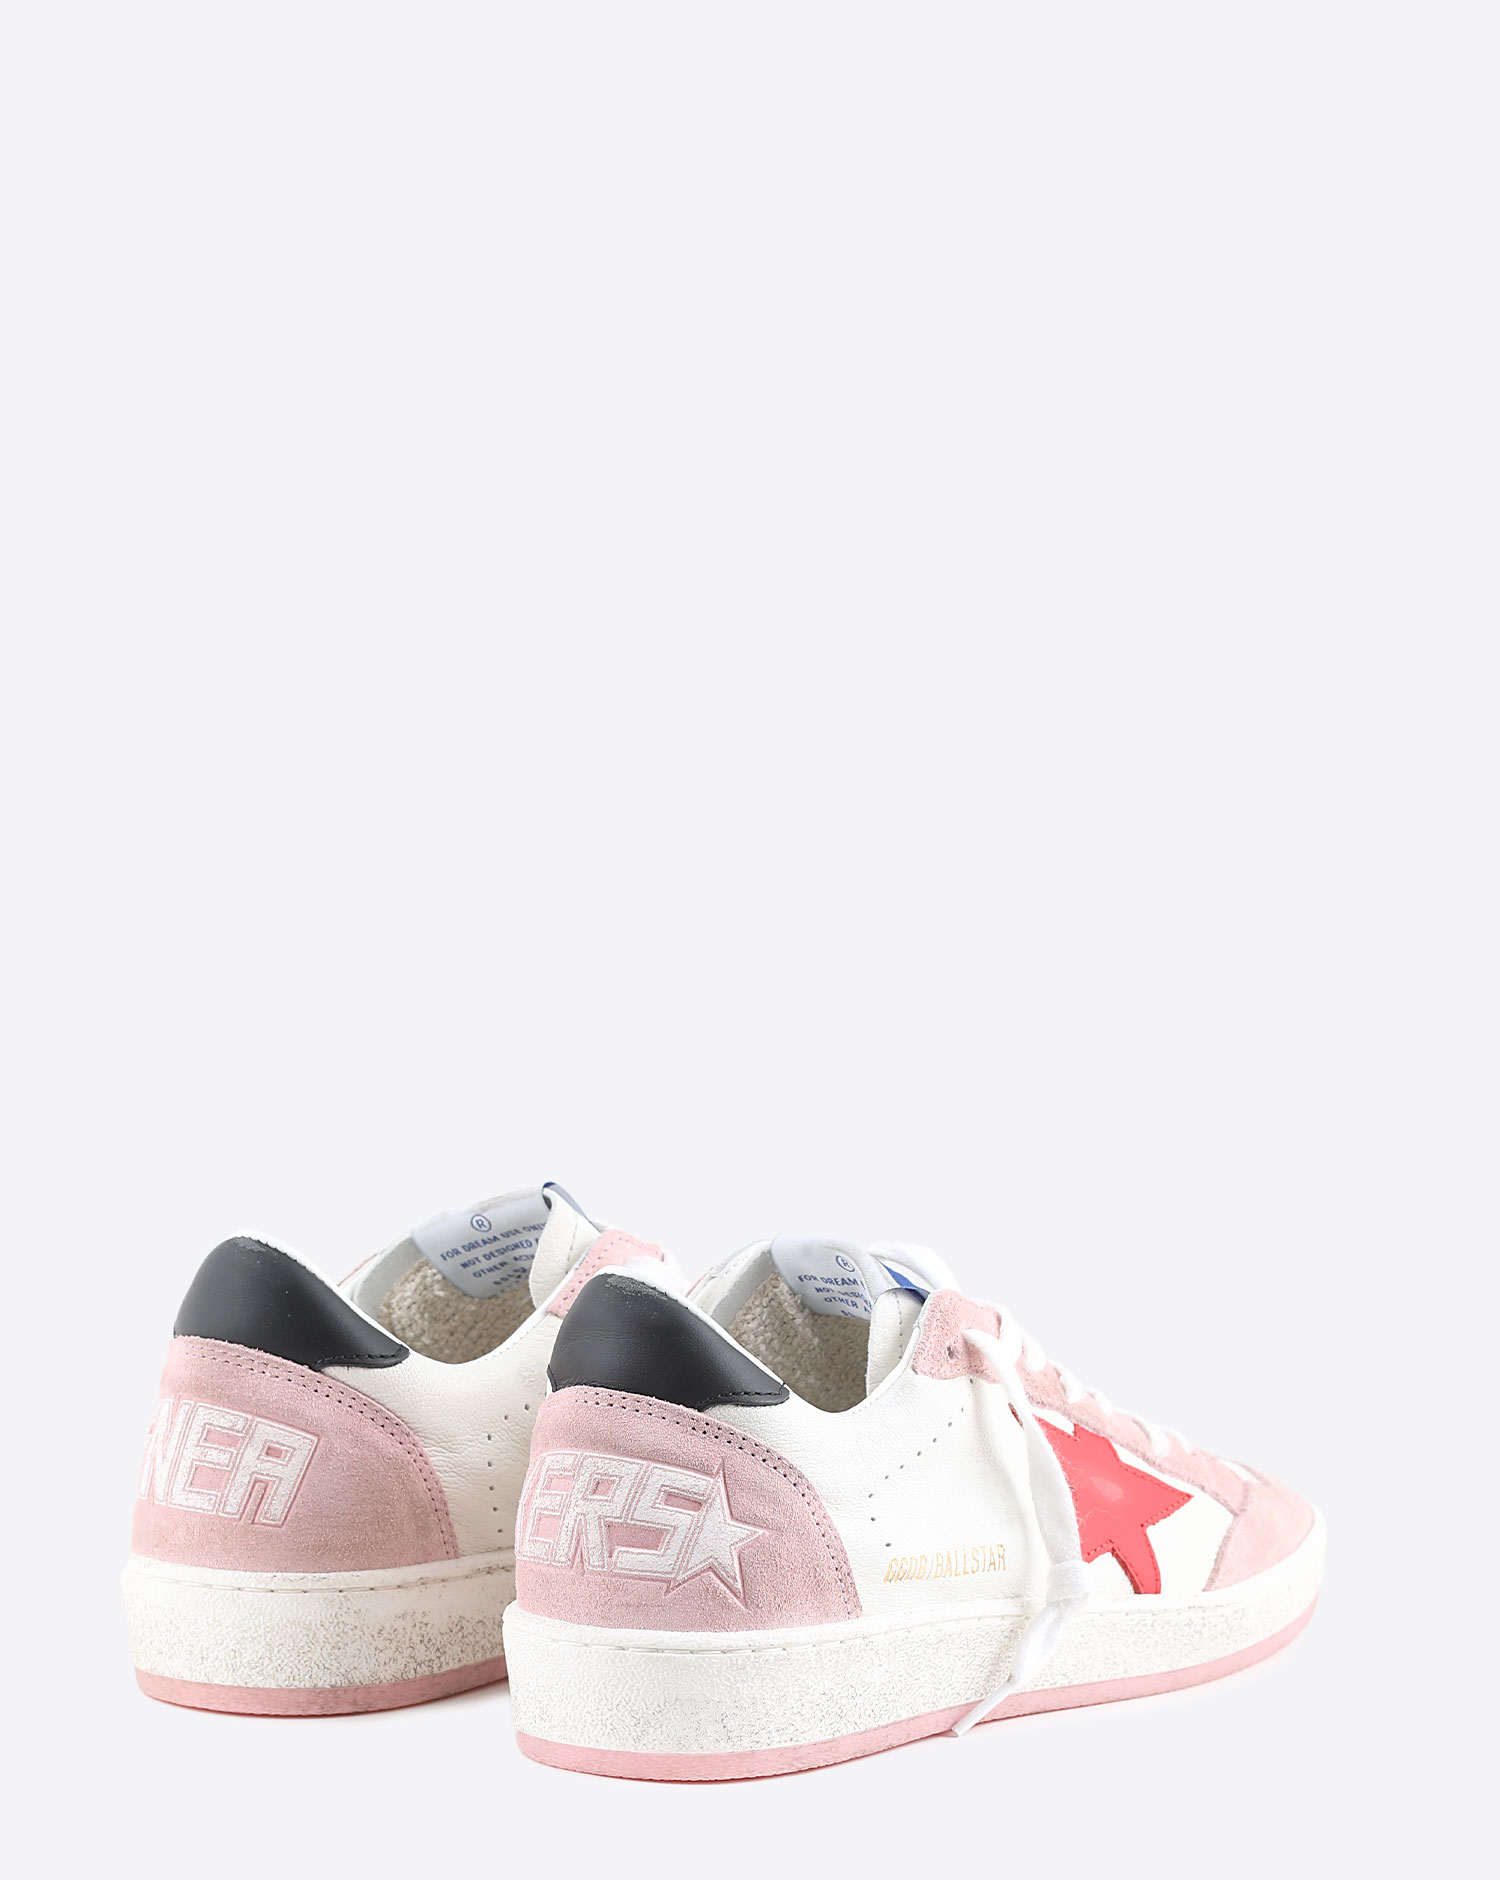 Sneakers Golden Goose Ball Star White Pink Red Black 10880. Dos.